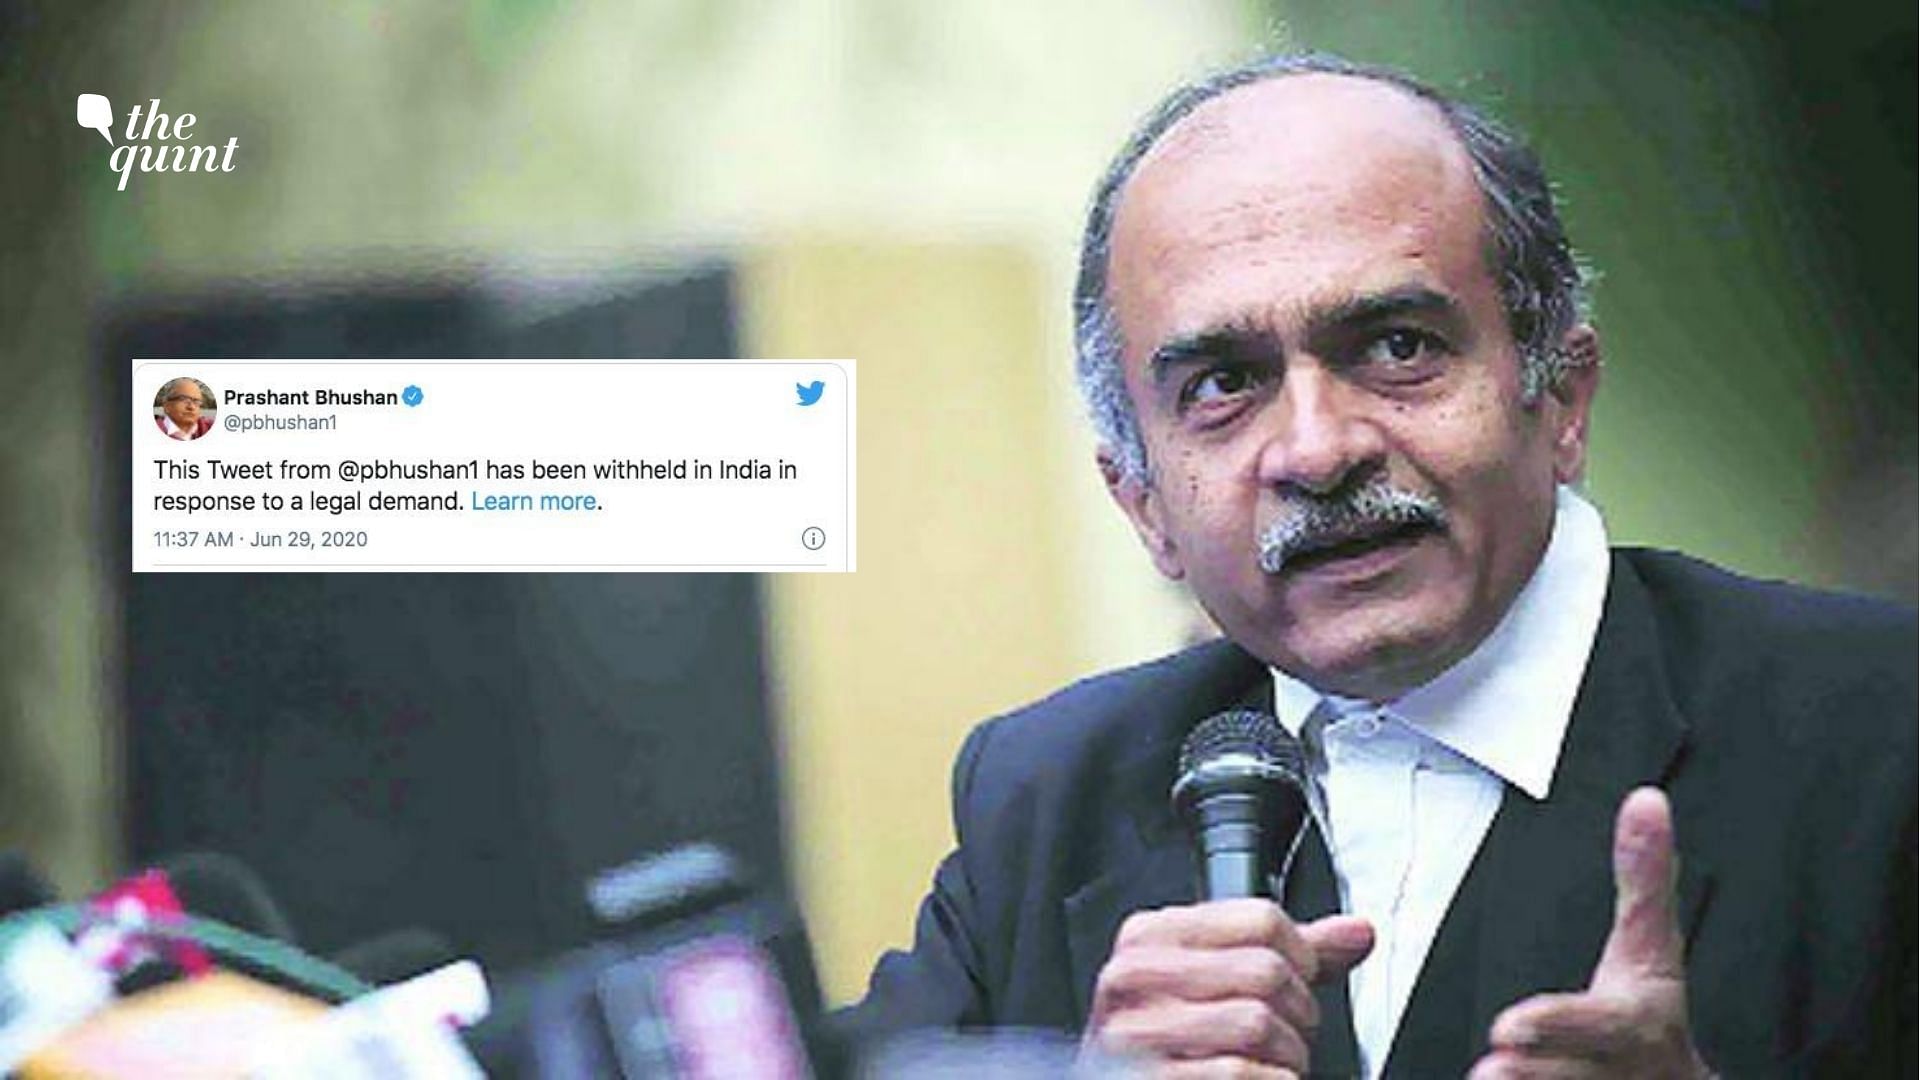 The tweets of senior advocate Prashant Bhushan, which were the basis for the <a href="https://www.thequint.com/news/india/truth-hurts-people-react-to-sc-notice-to-prashant-bhushan">contempt notice against him by the Supreme Court</a>, have been withheld by Twitter even though there is no order to that effect from the top court.